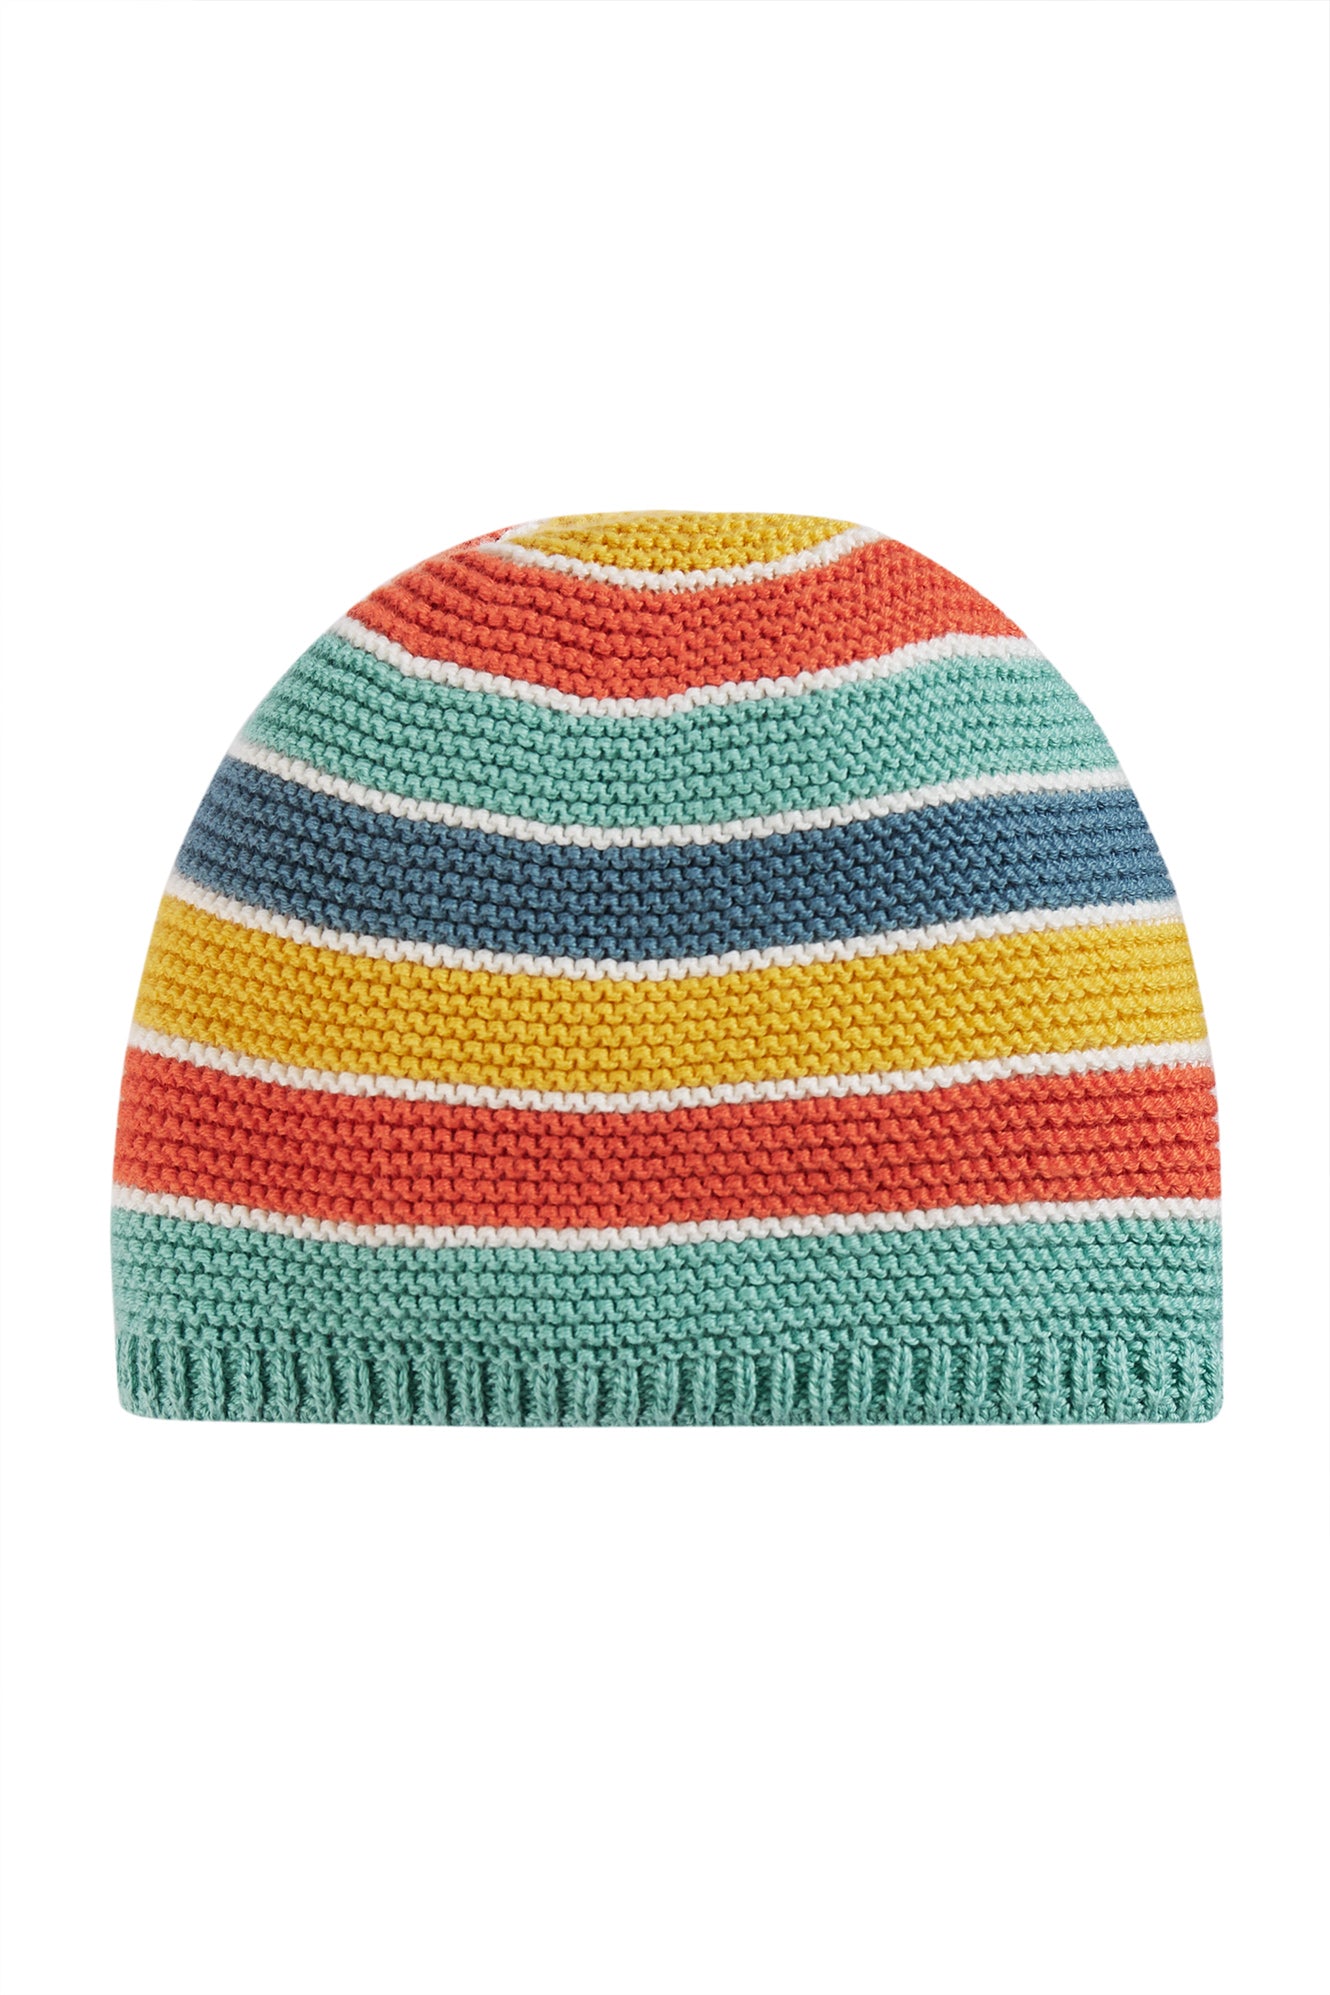 harlen knitted rainbow stripe hat by frugi at whippersnappers online